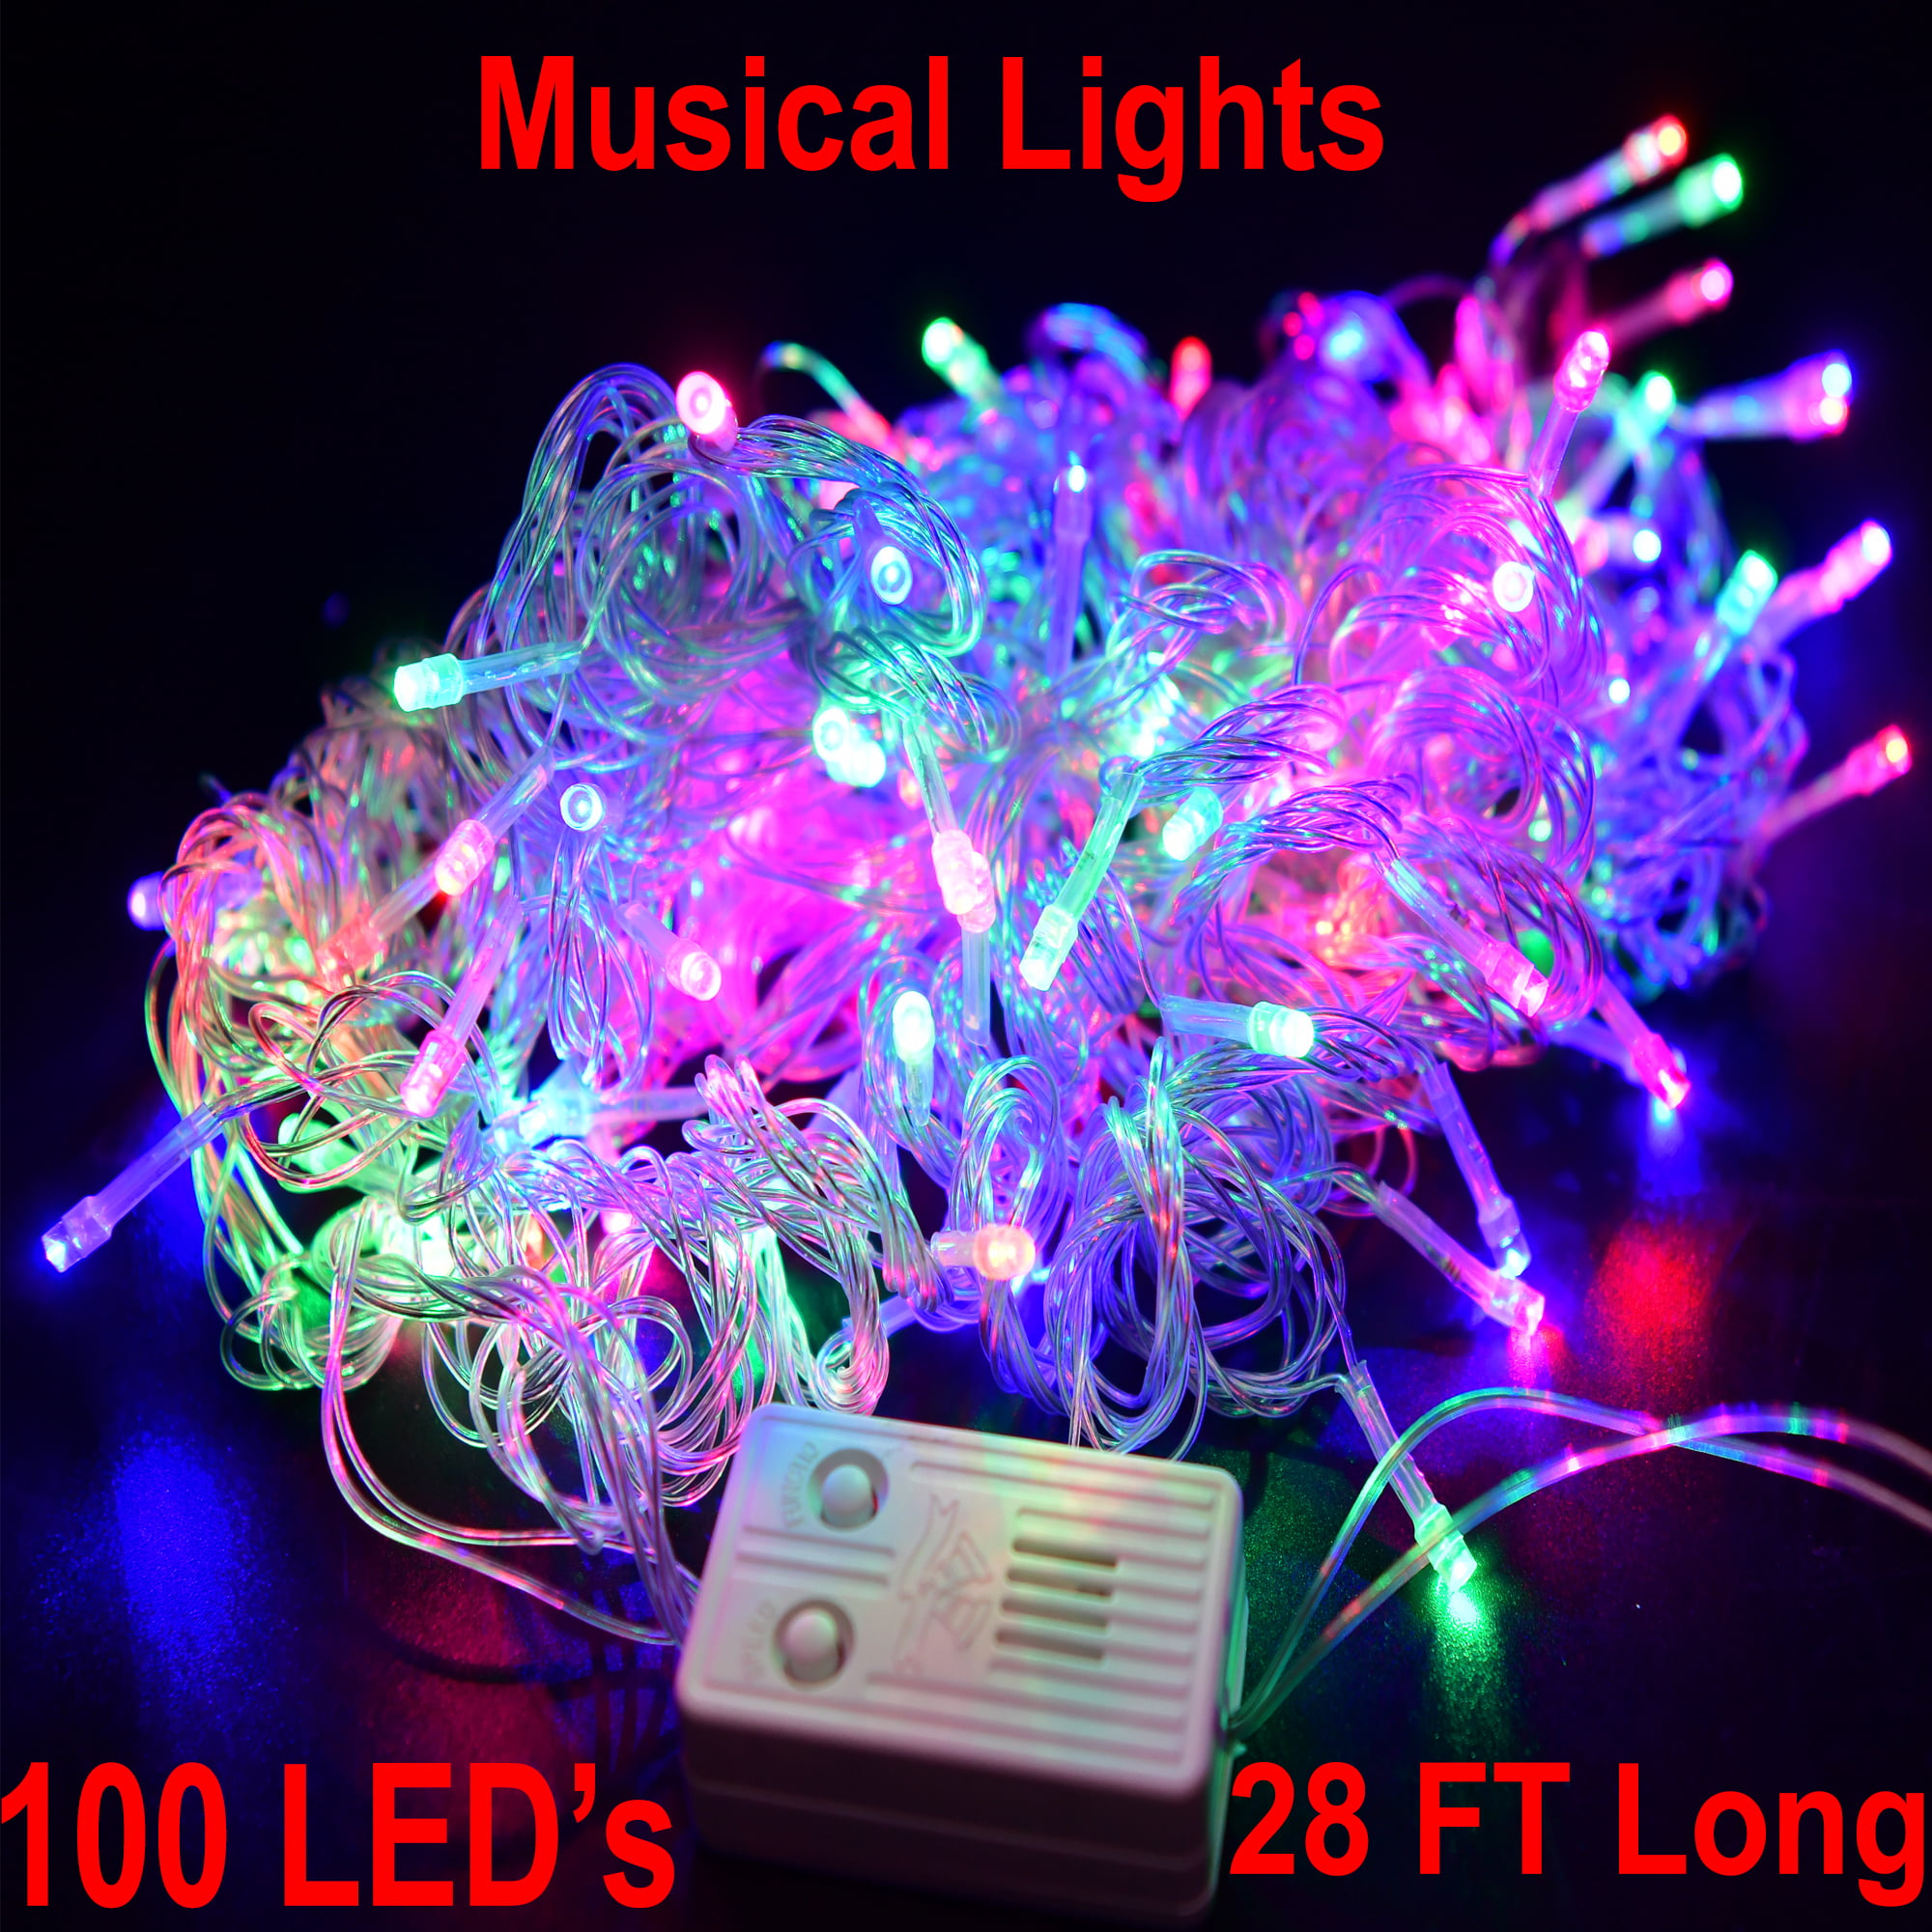 Musical Lights Twinkling Tree 100 LED Strip With Music Clear Wire Multicolor Singing Luces De Navidad - Walmart.com